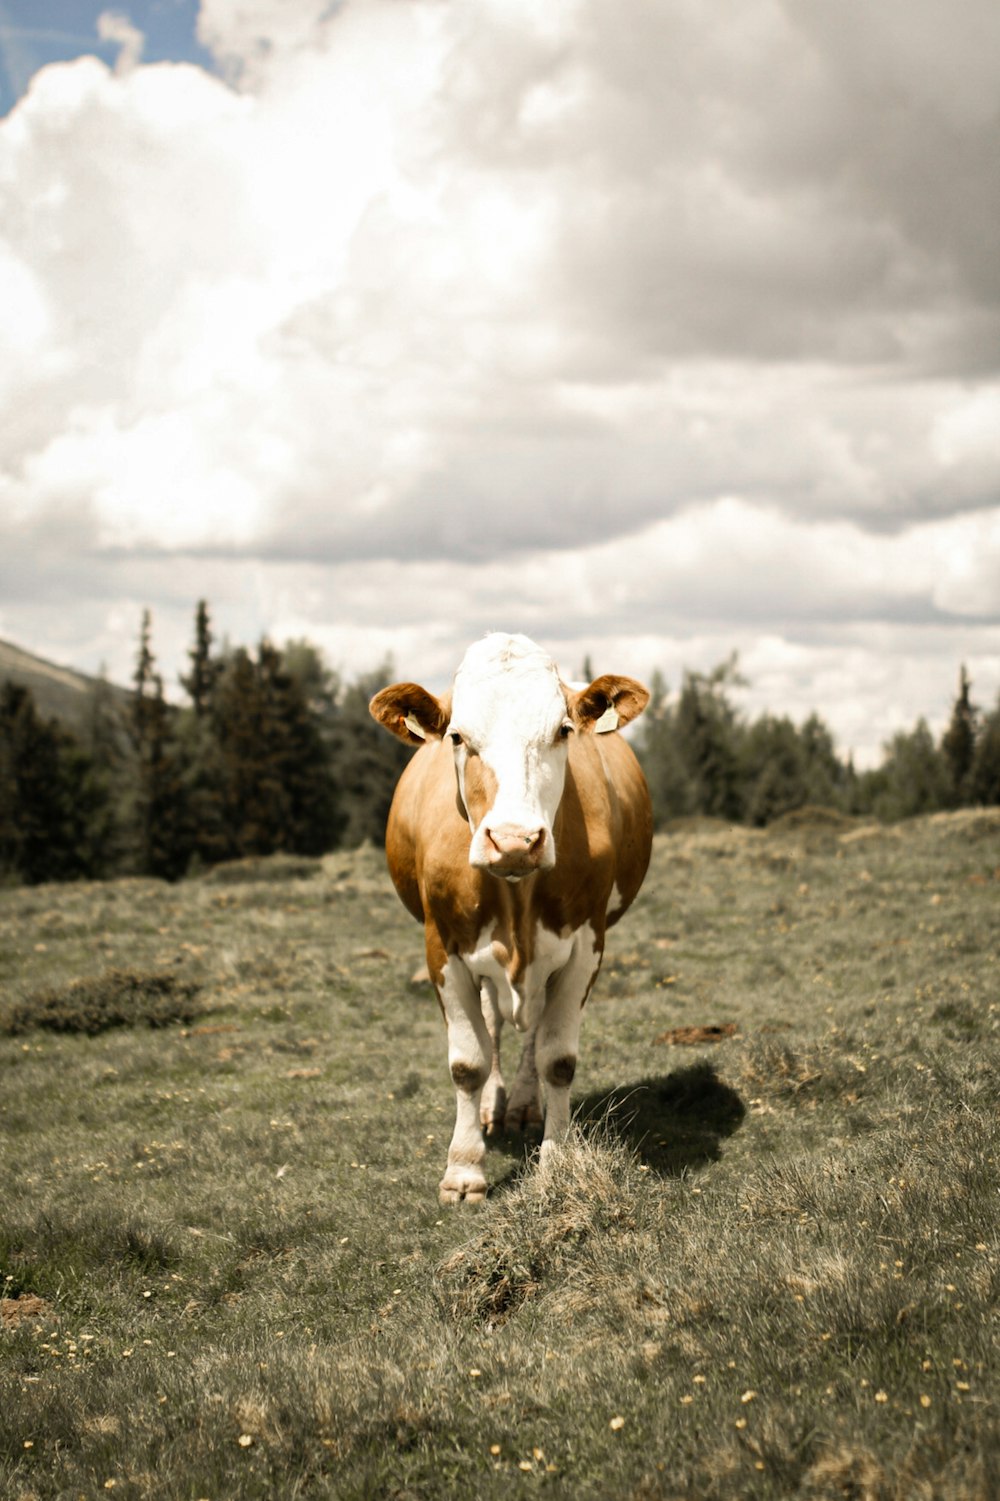 brown and white cow on green grass field